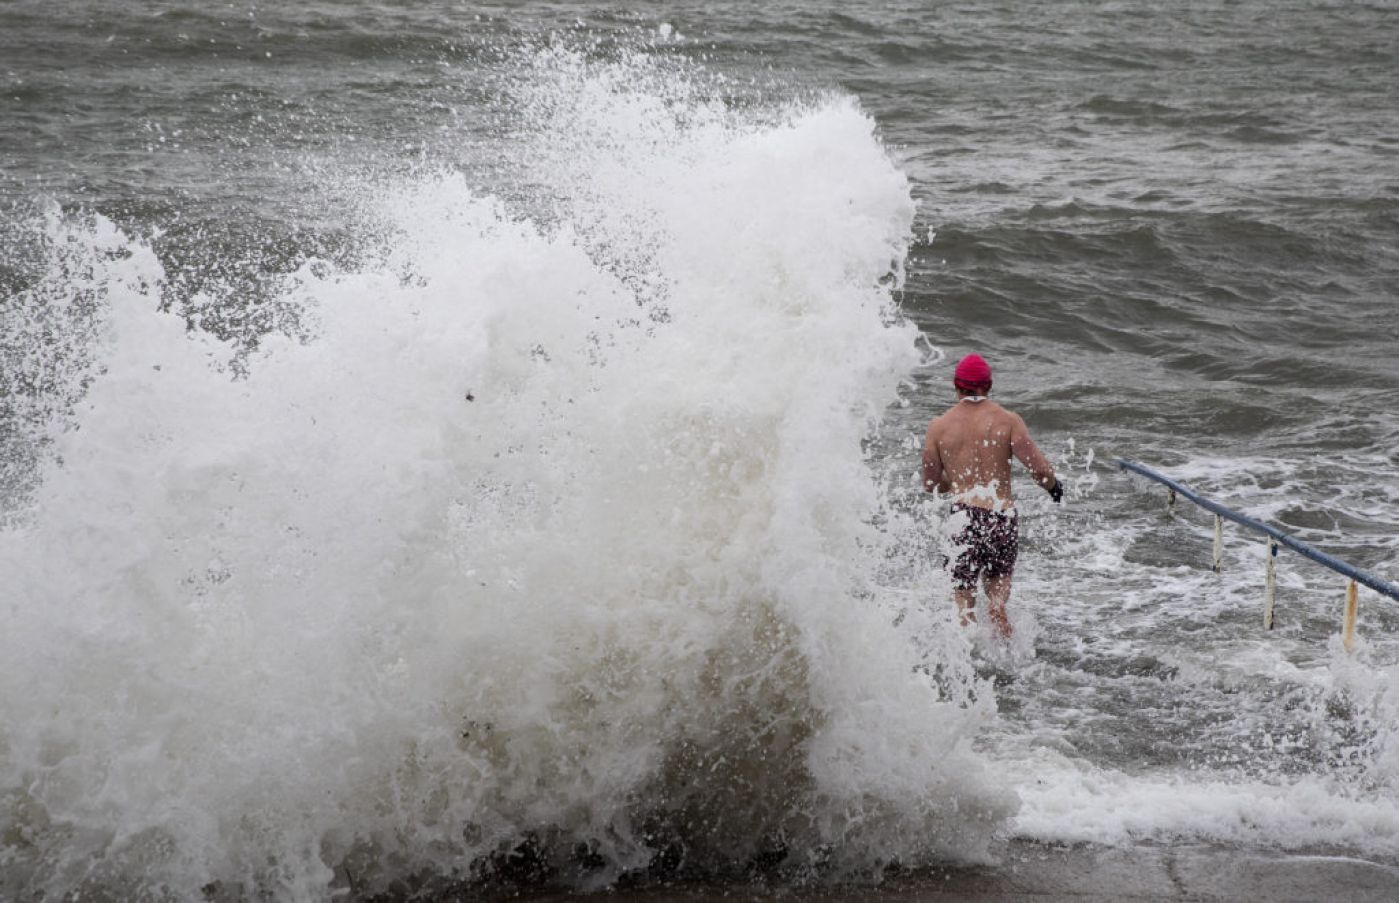 Patrick Finlay Enters The Sea At Seapoint In Dublin. Photo: Pa Images.